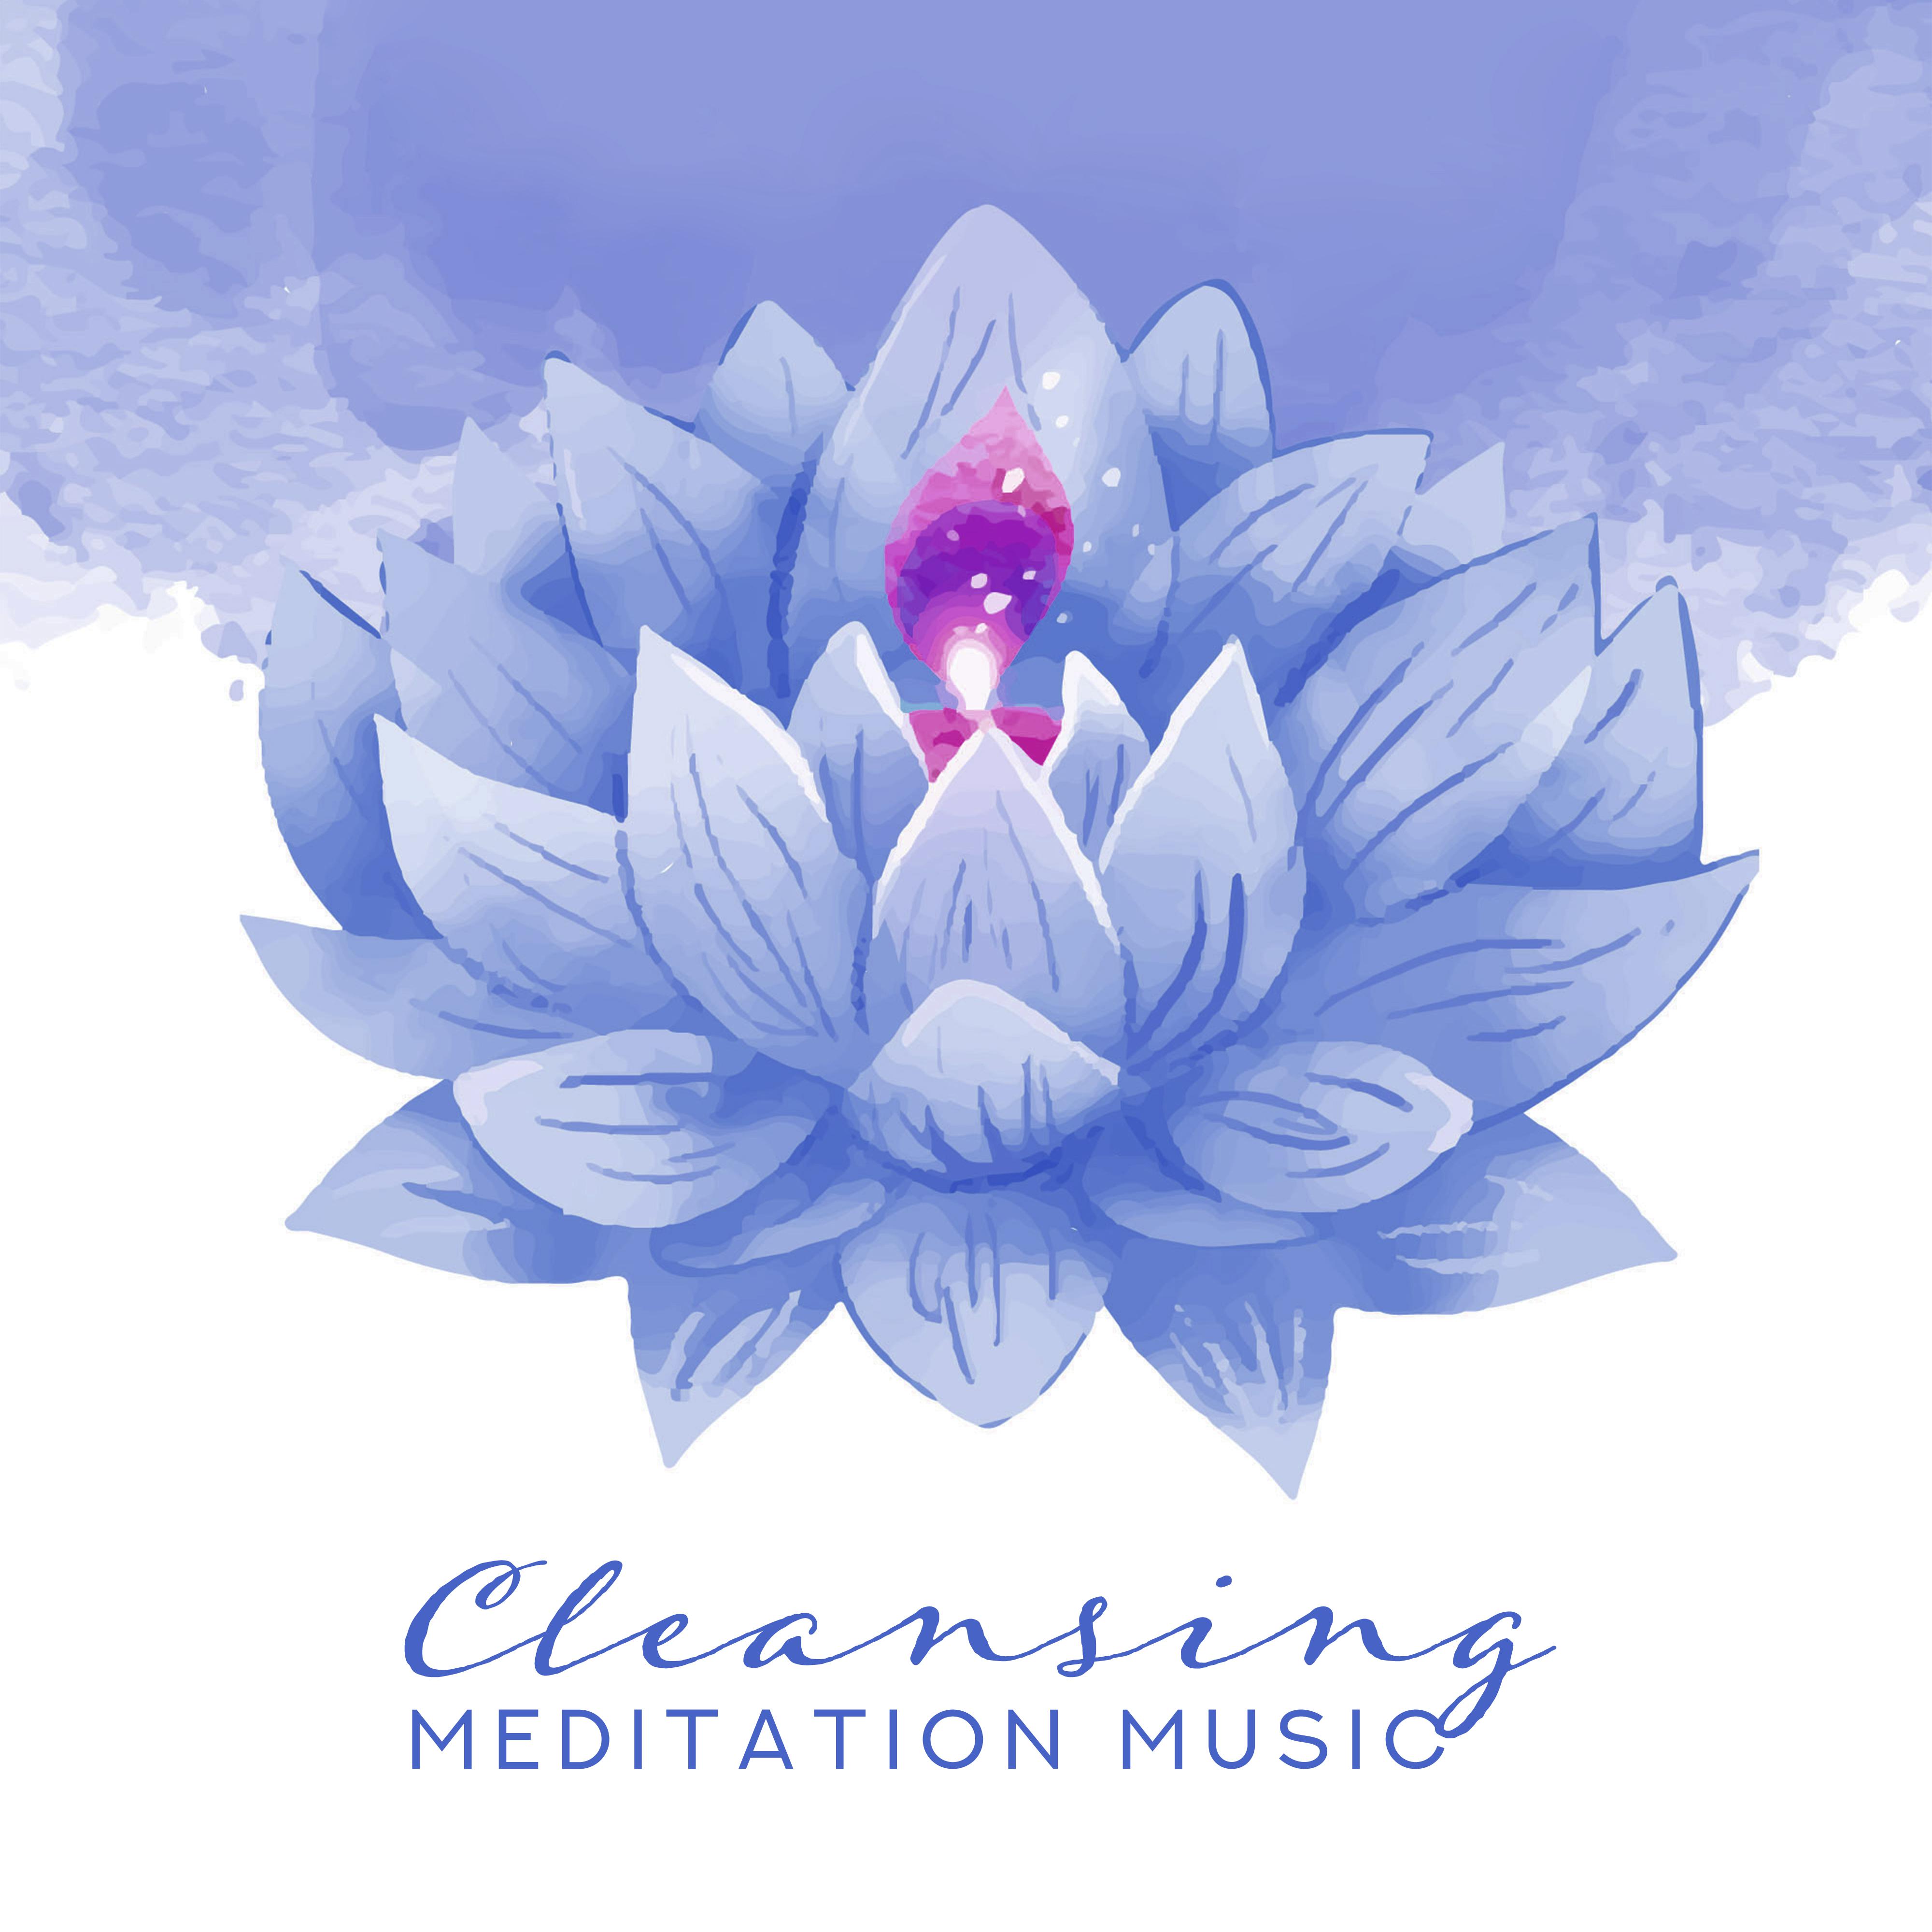 Cleansing Meditation Music: Meditation Music that Cleanses the Mind and Feelings from Bad Emotions, Reduces Stress and Tension, Calms Down, Helps Cleanse the Chakras and Deeply Relaxes